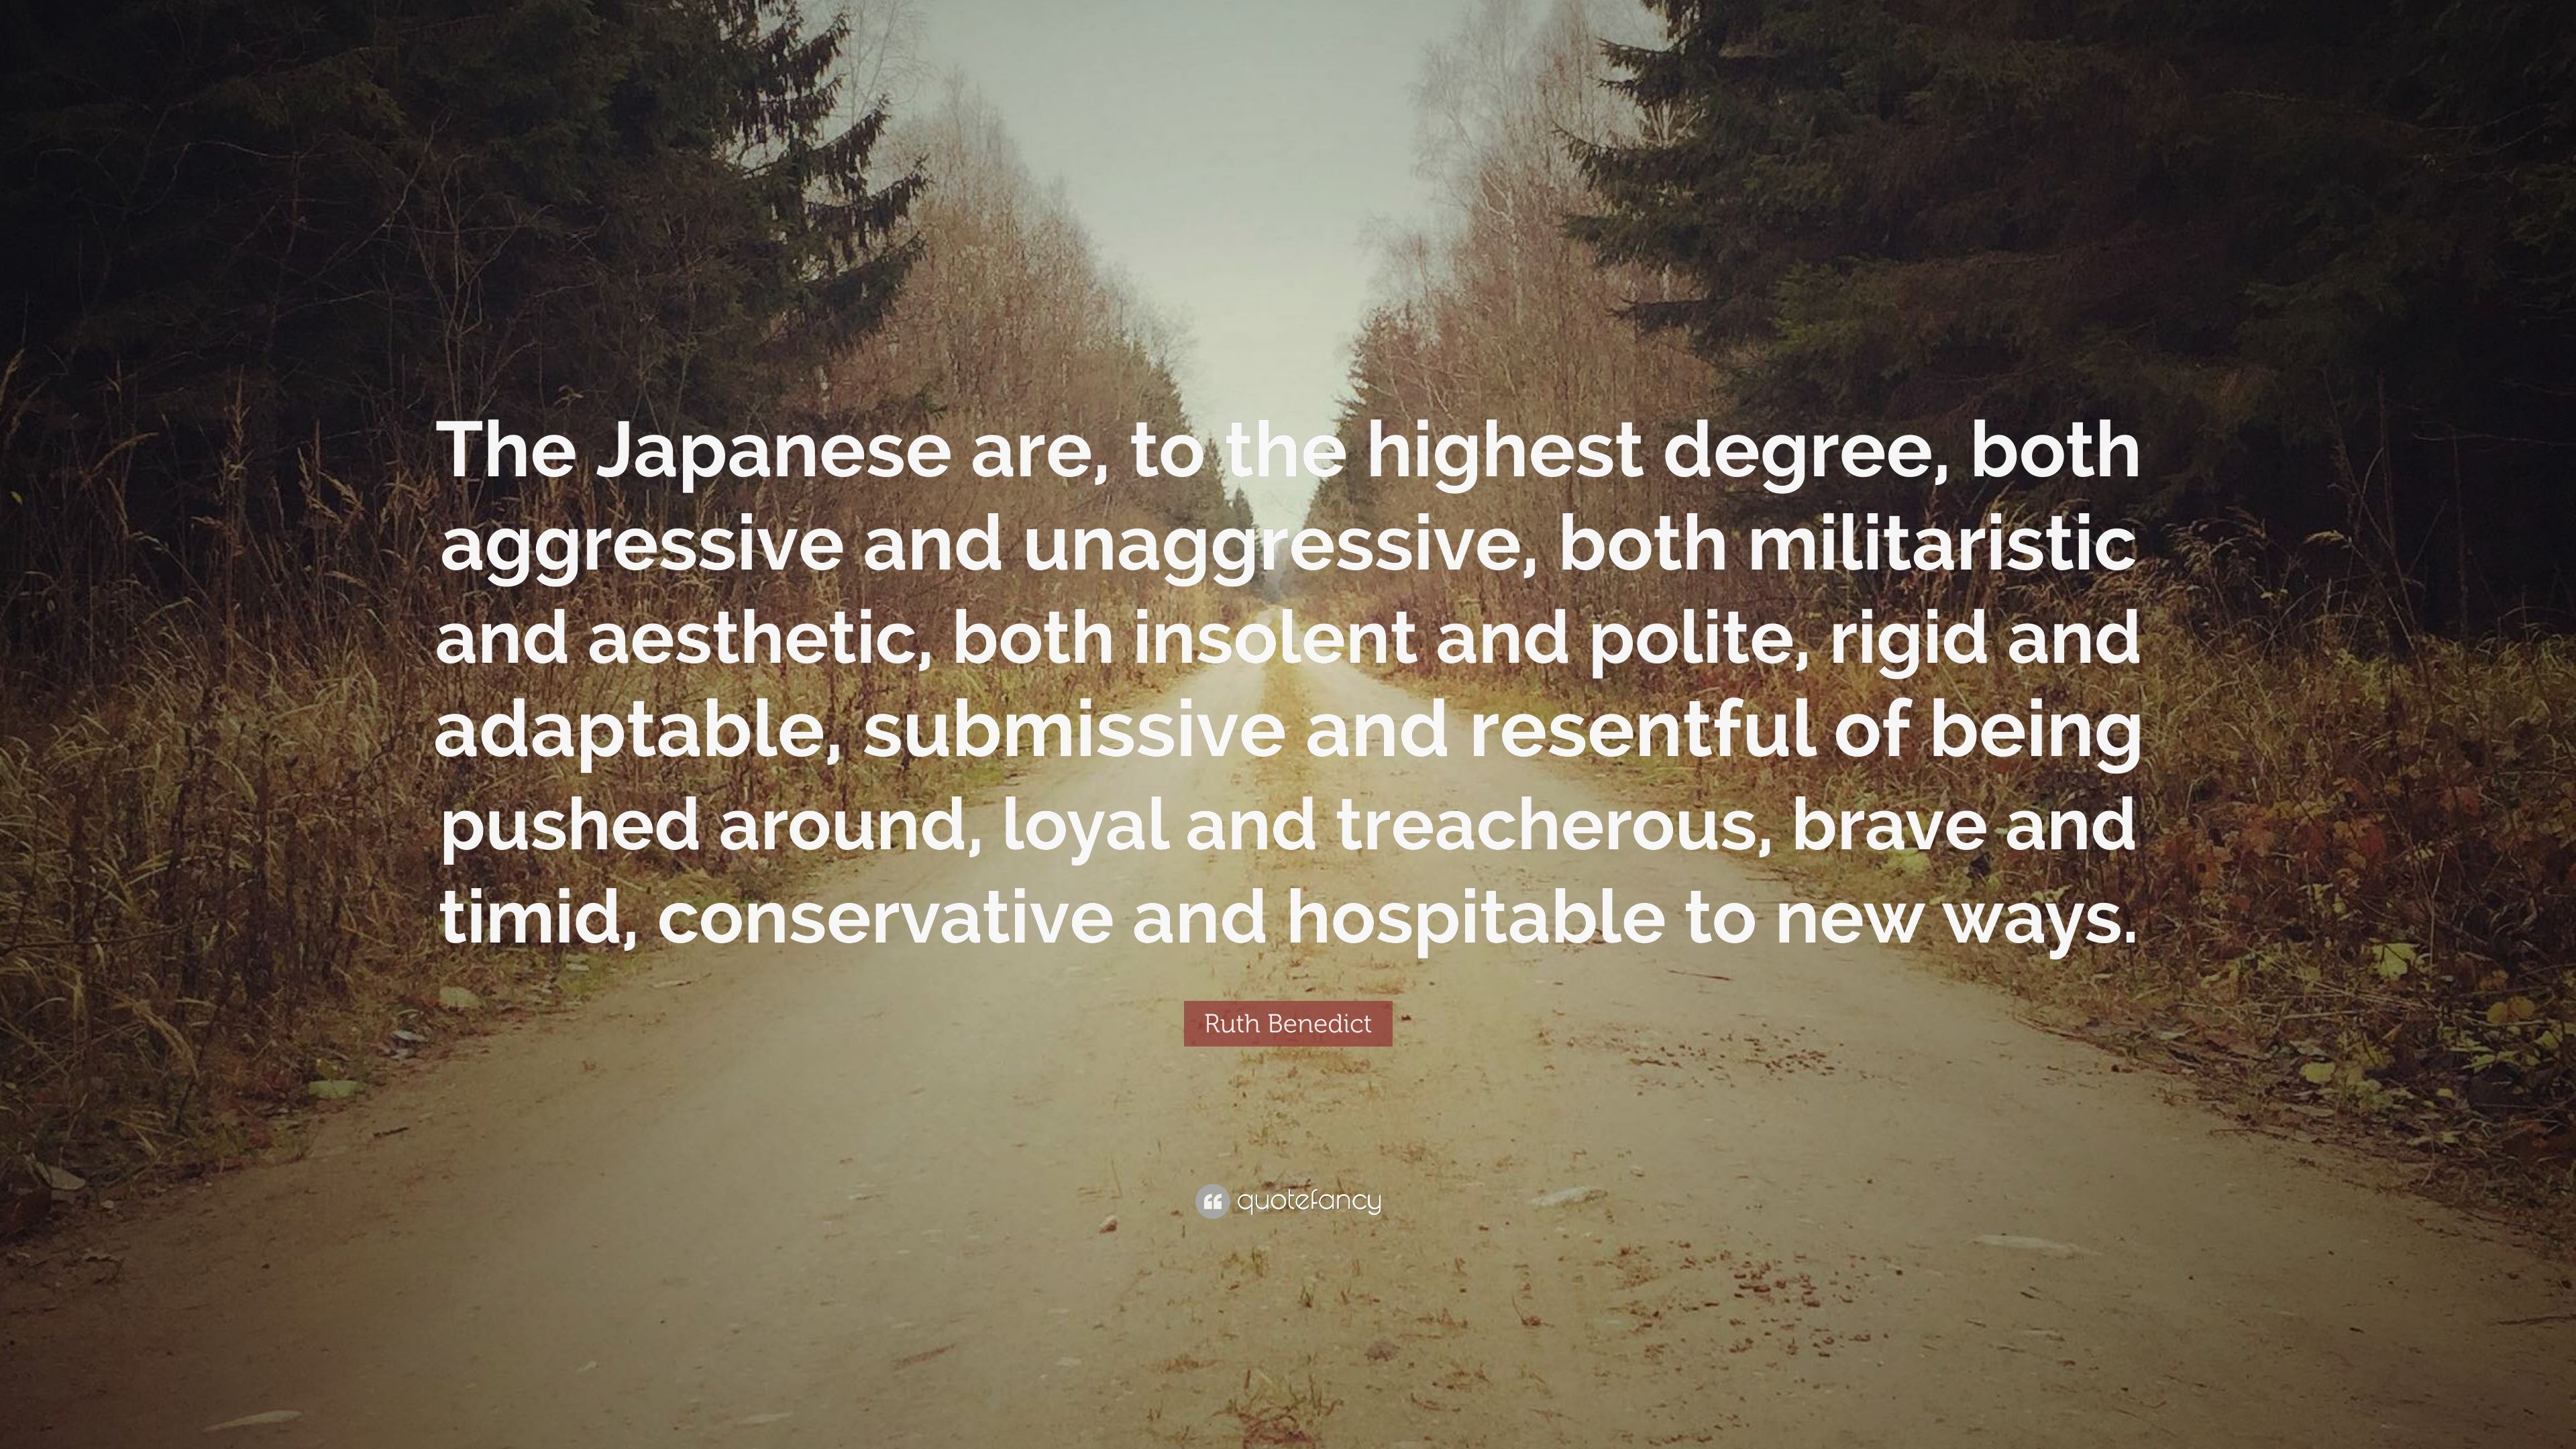 Ruth Benedict Quote: “The Japanese are, to the highest degree